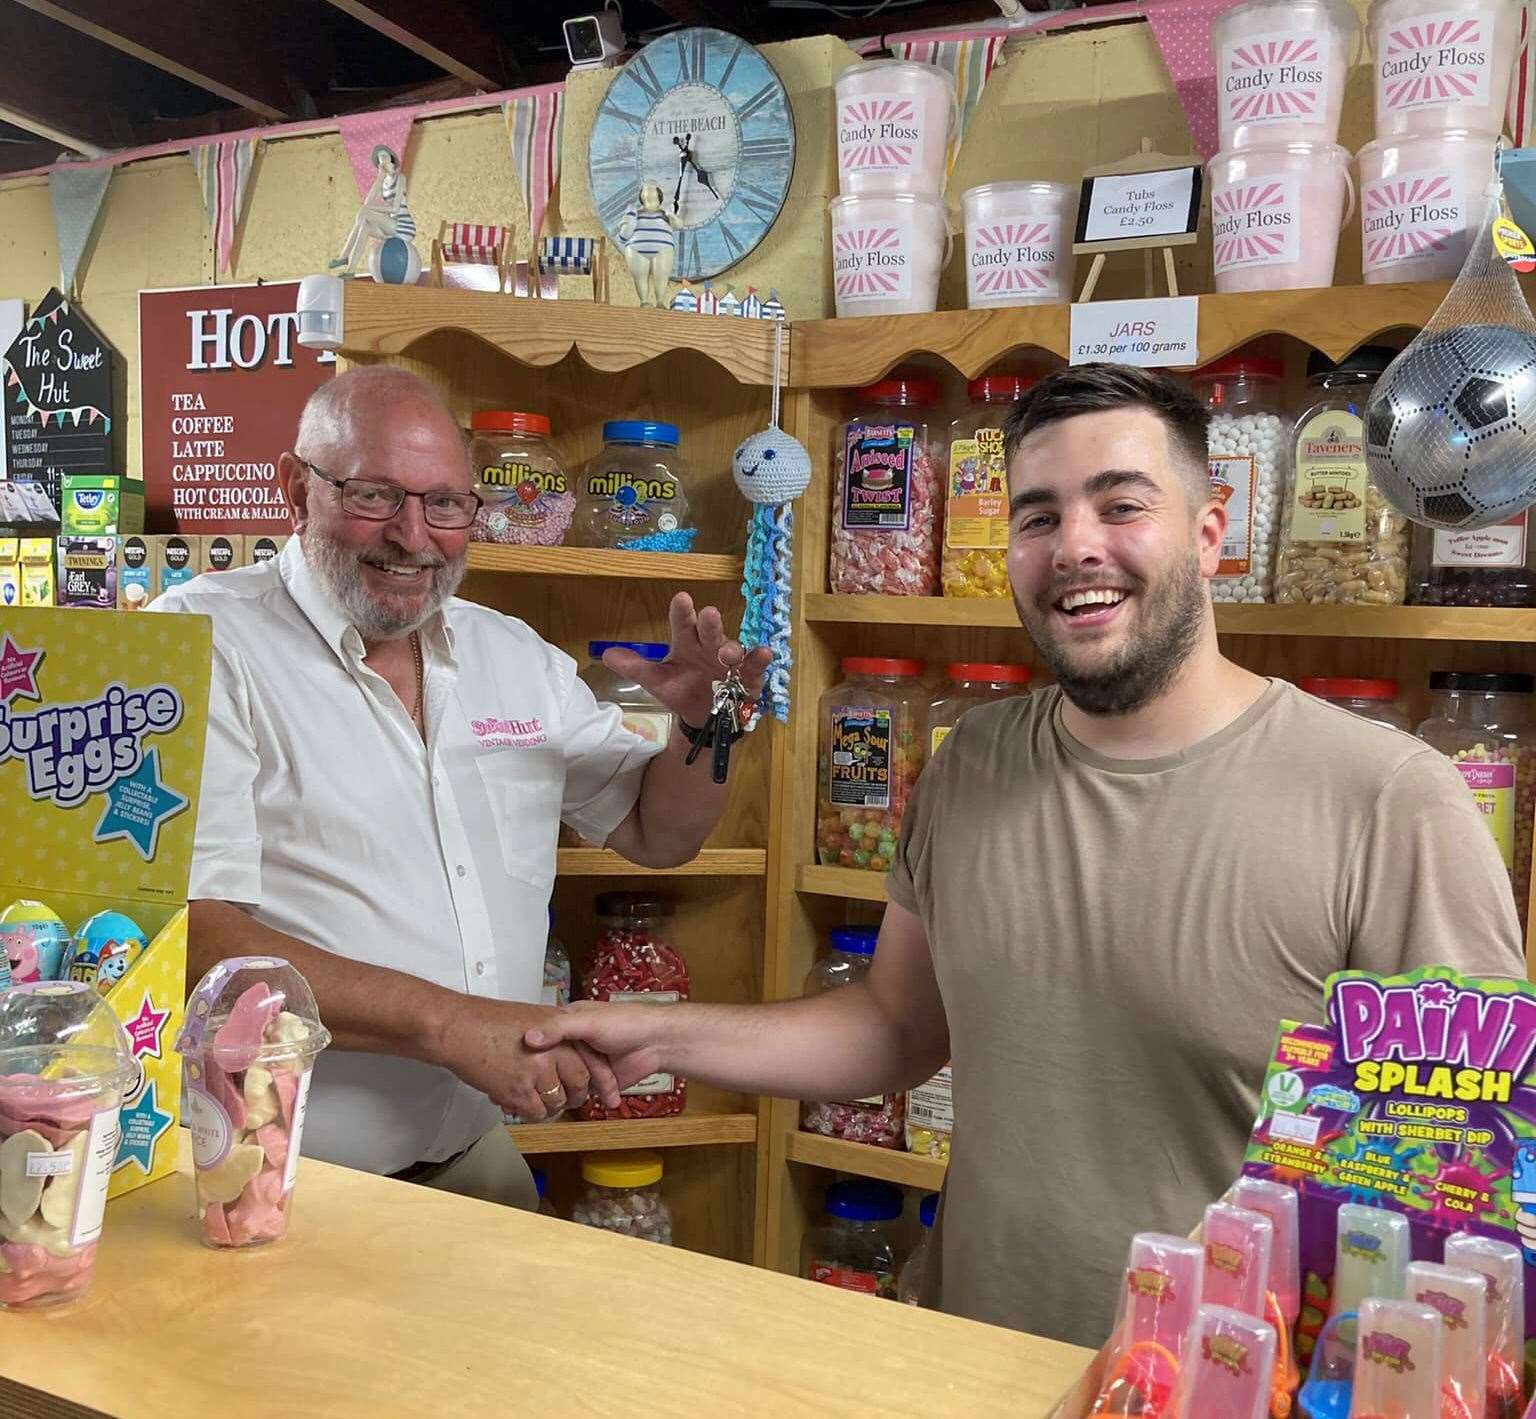 Owner Steven Read (right) says he feels "annoyed" about what has happened at The Sweet Hut